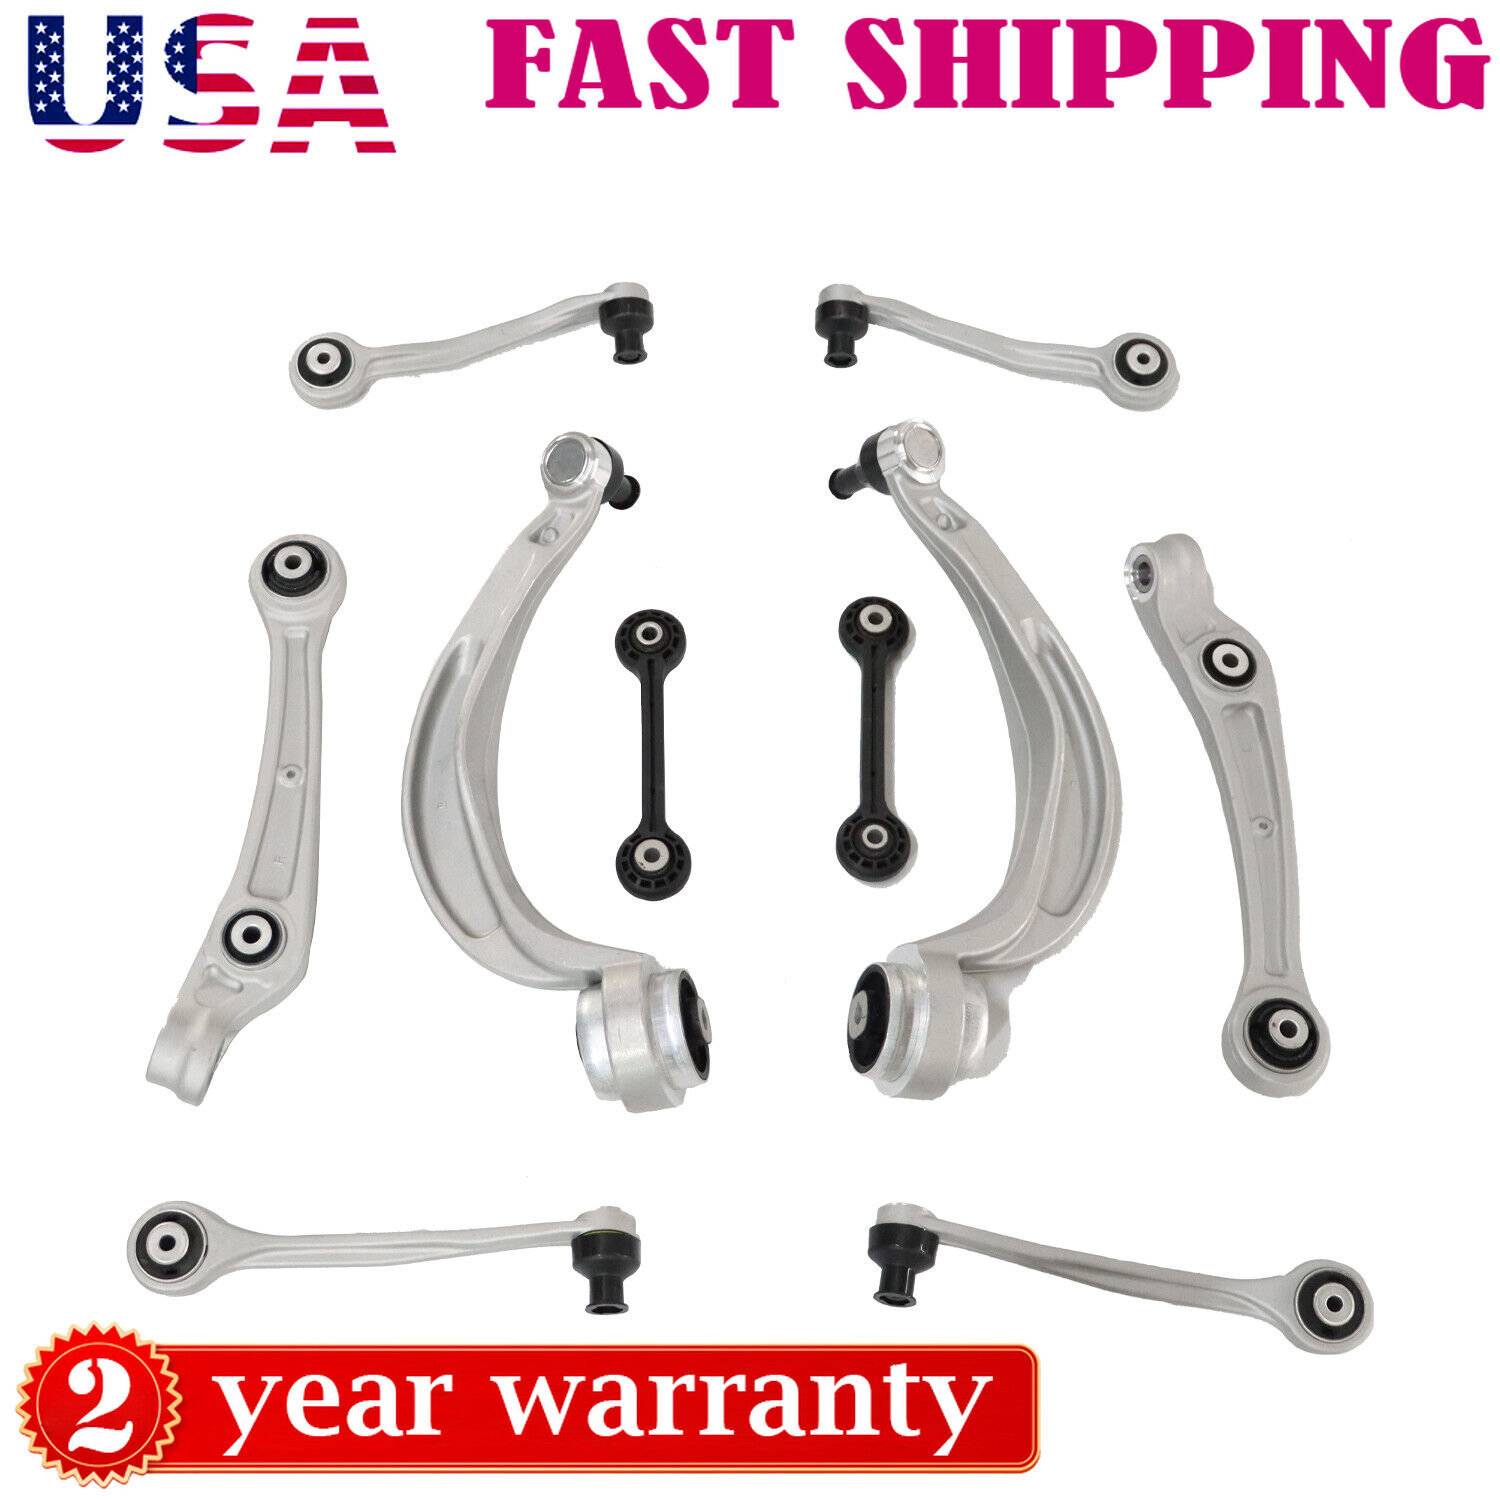 Control Arms Lateral Link For 2008-2009 Audi A4 A5 S4 S5 Q5 10Pc Kit